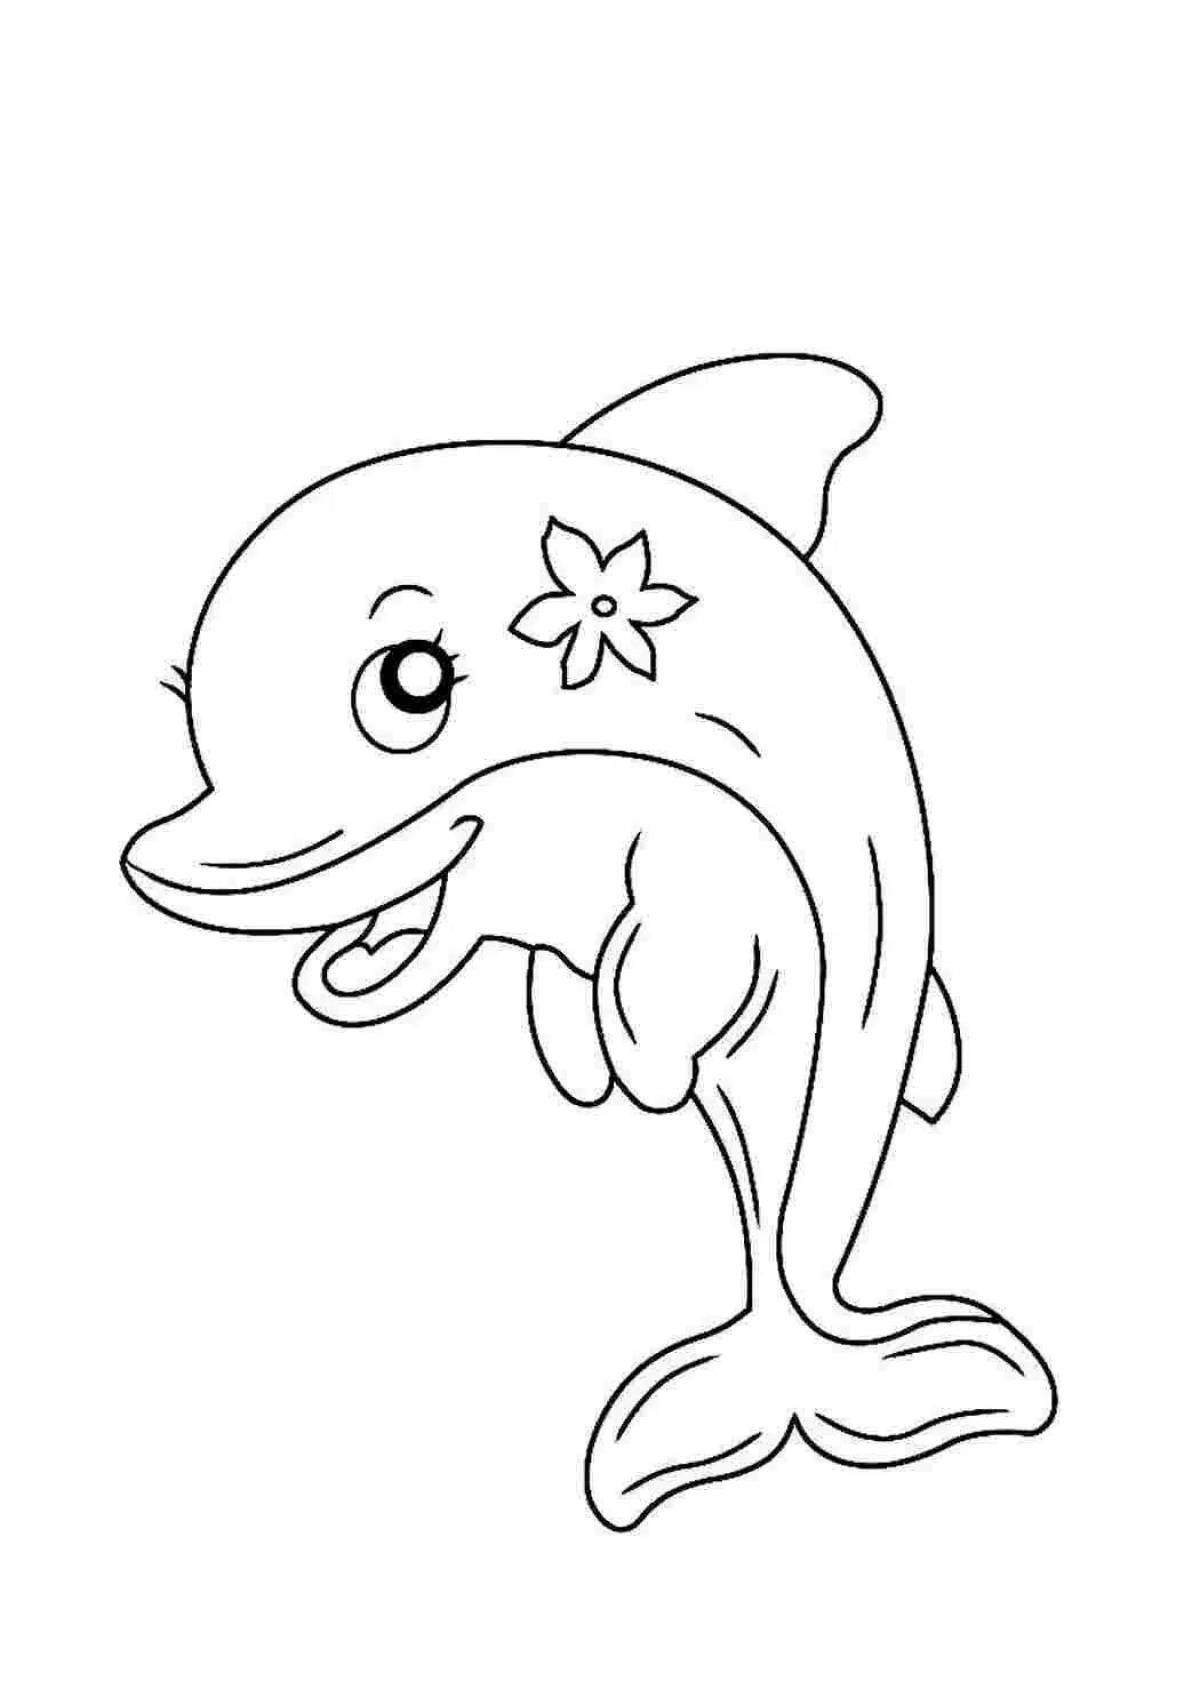 Dolphin for kids #3